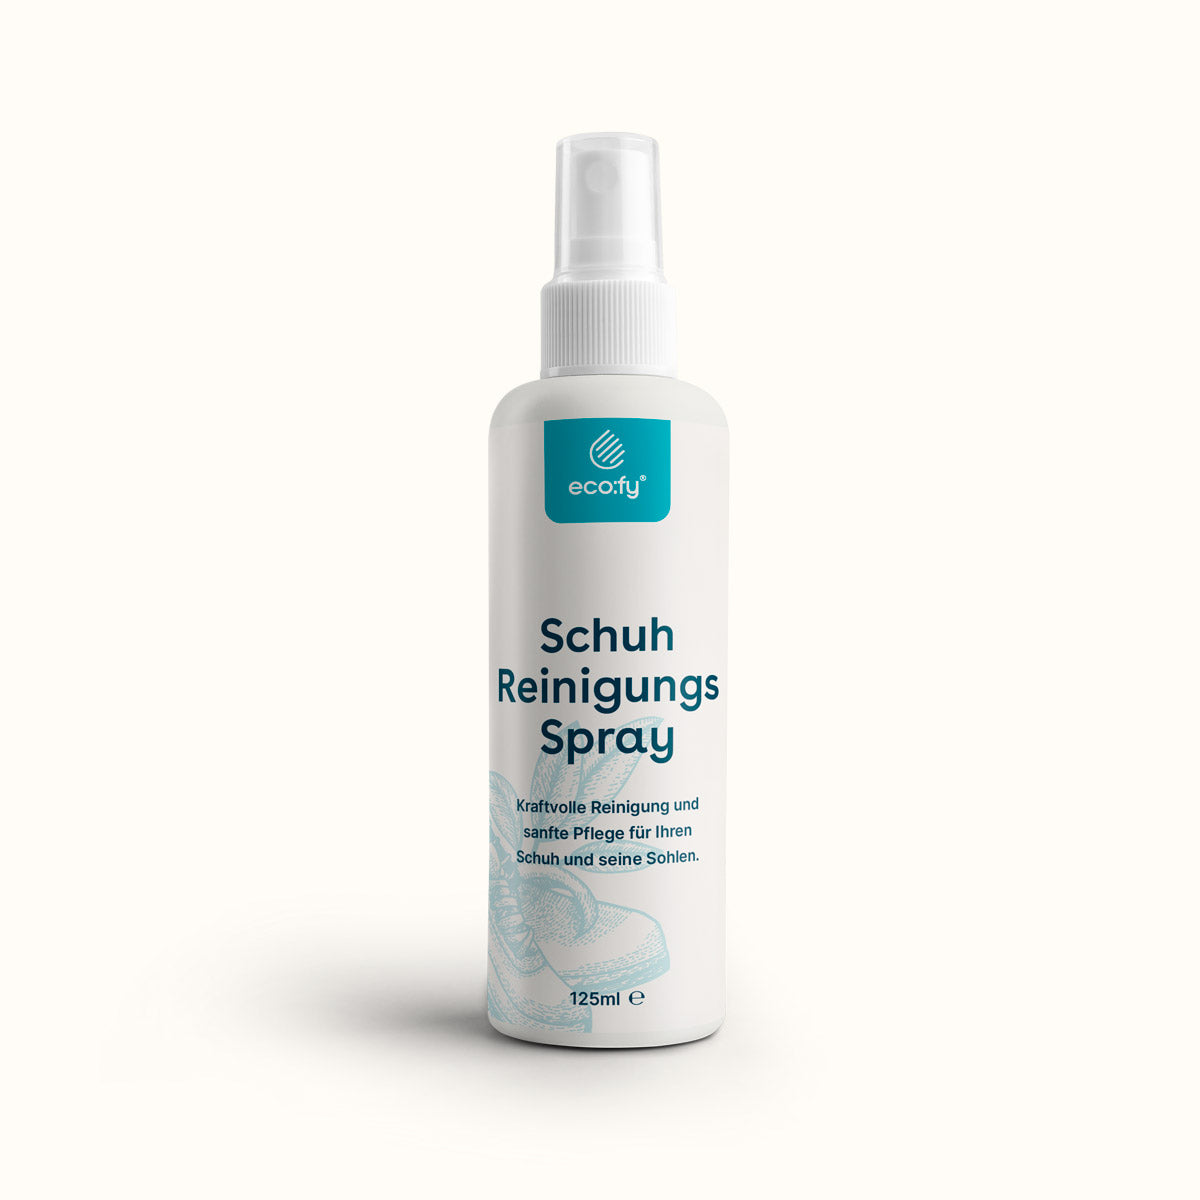 Shoe cleaning spray